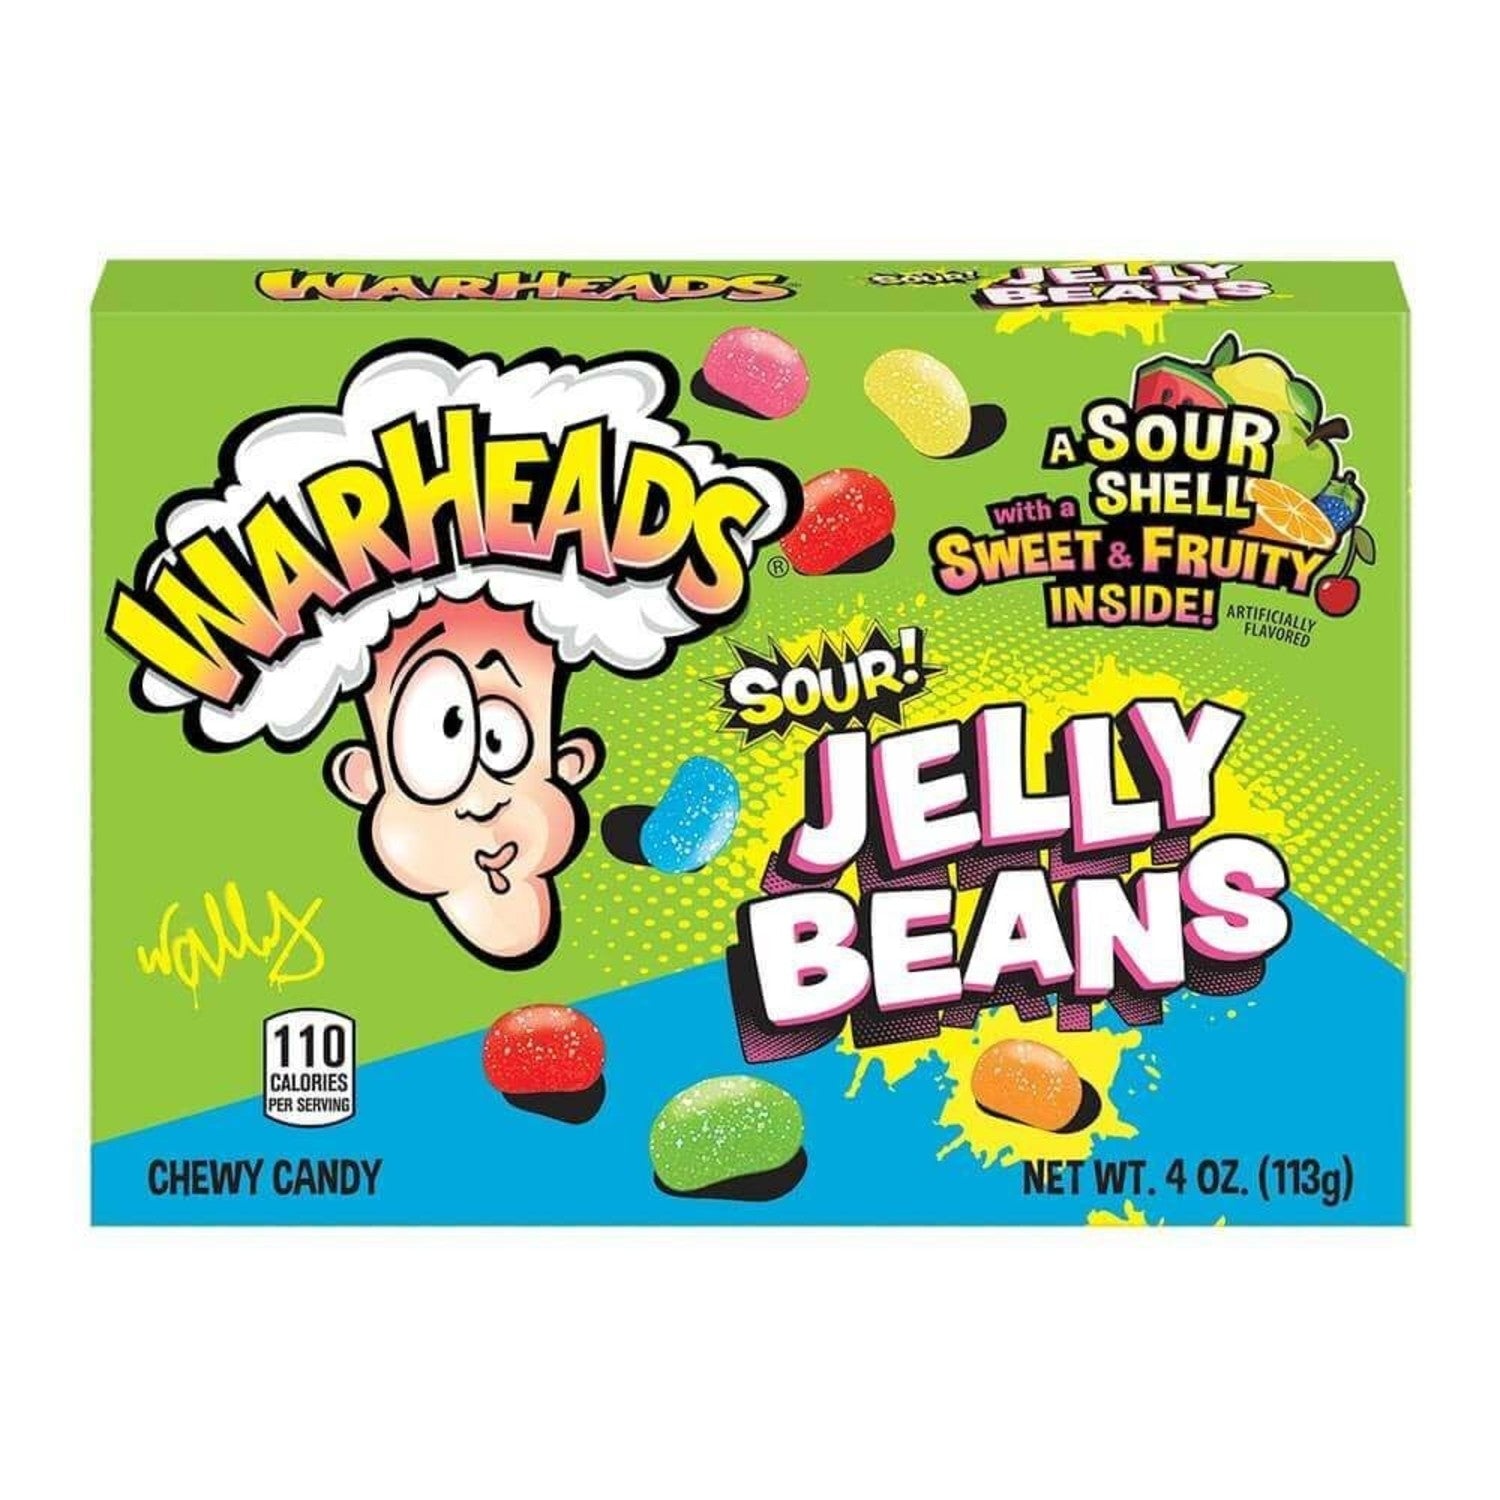 Warhead sour jelly beans